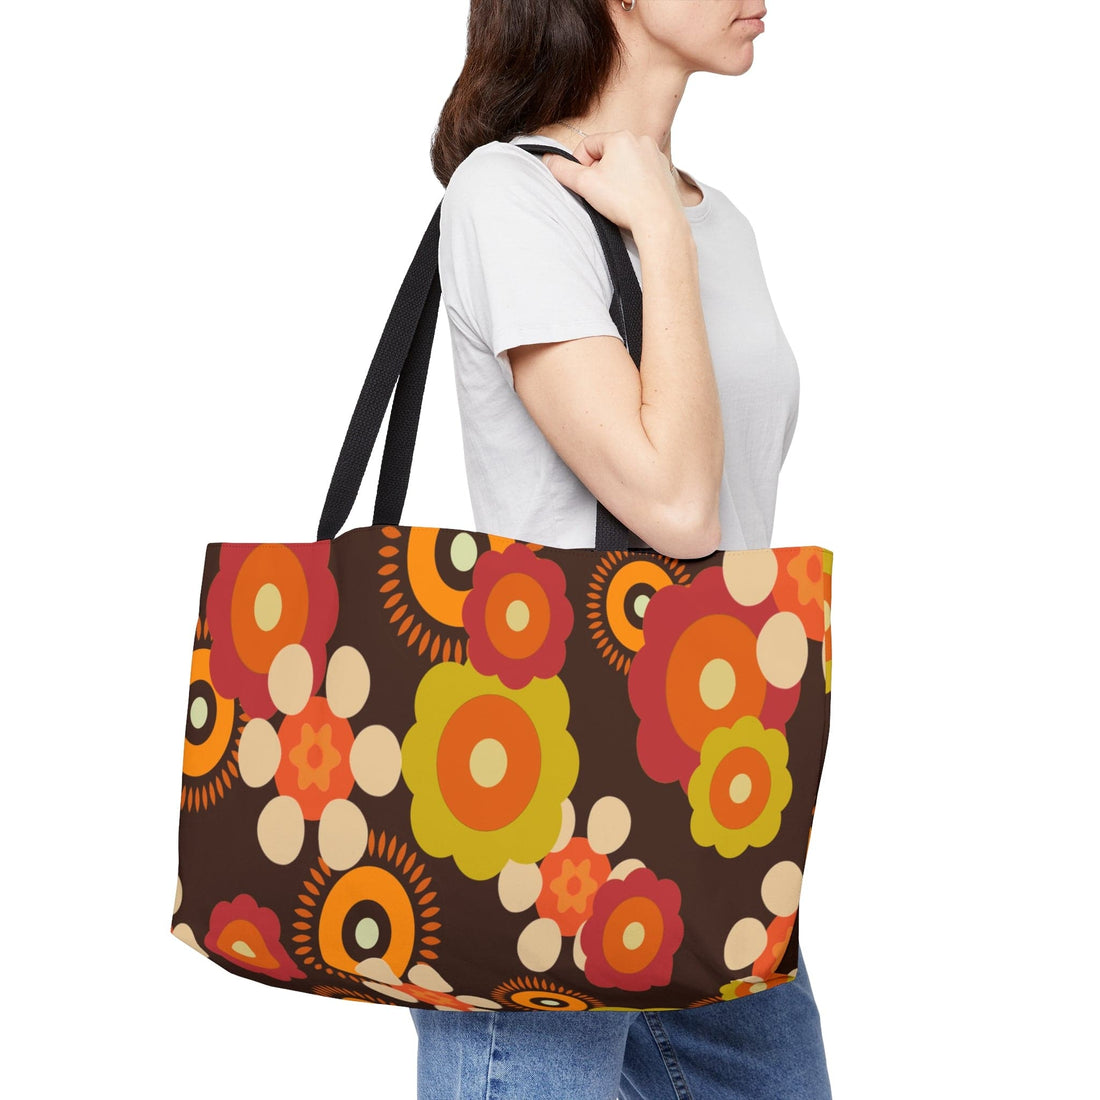 Kate McEnroe New York Groovy 60s Hippie Boho Weekender Tote Bag Totes 24&quot; × 13&quot; 30005335308137617011